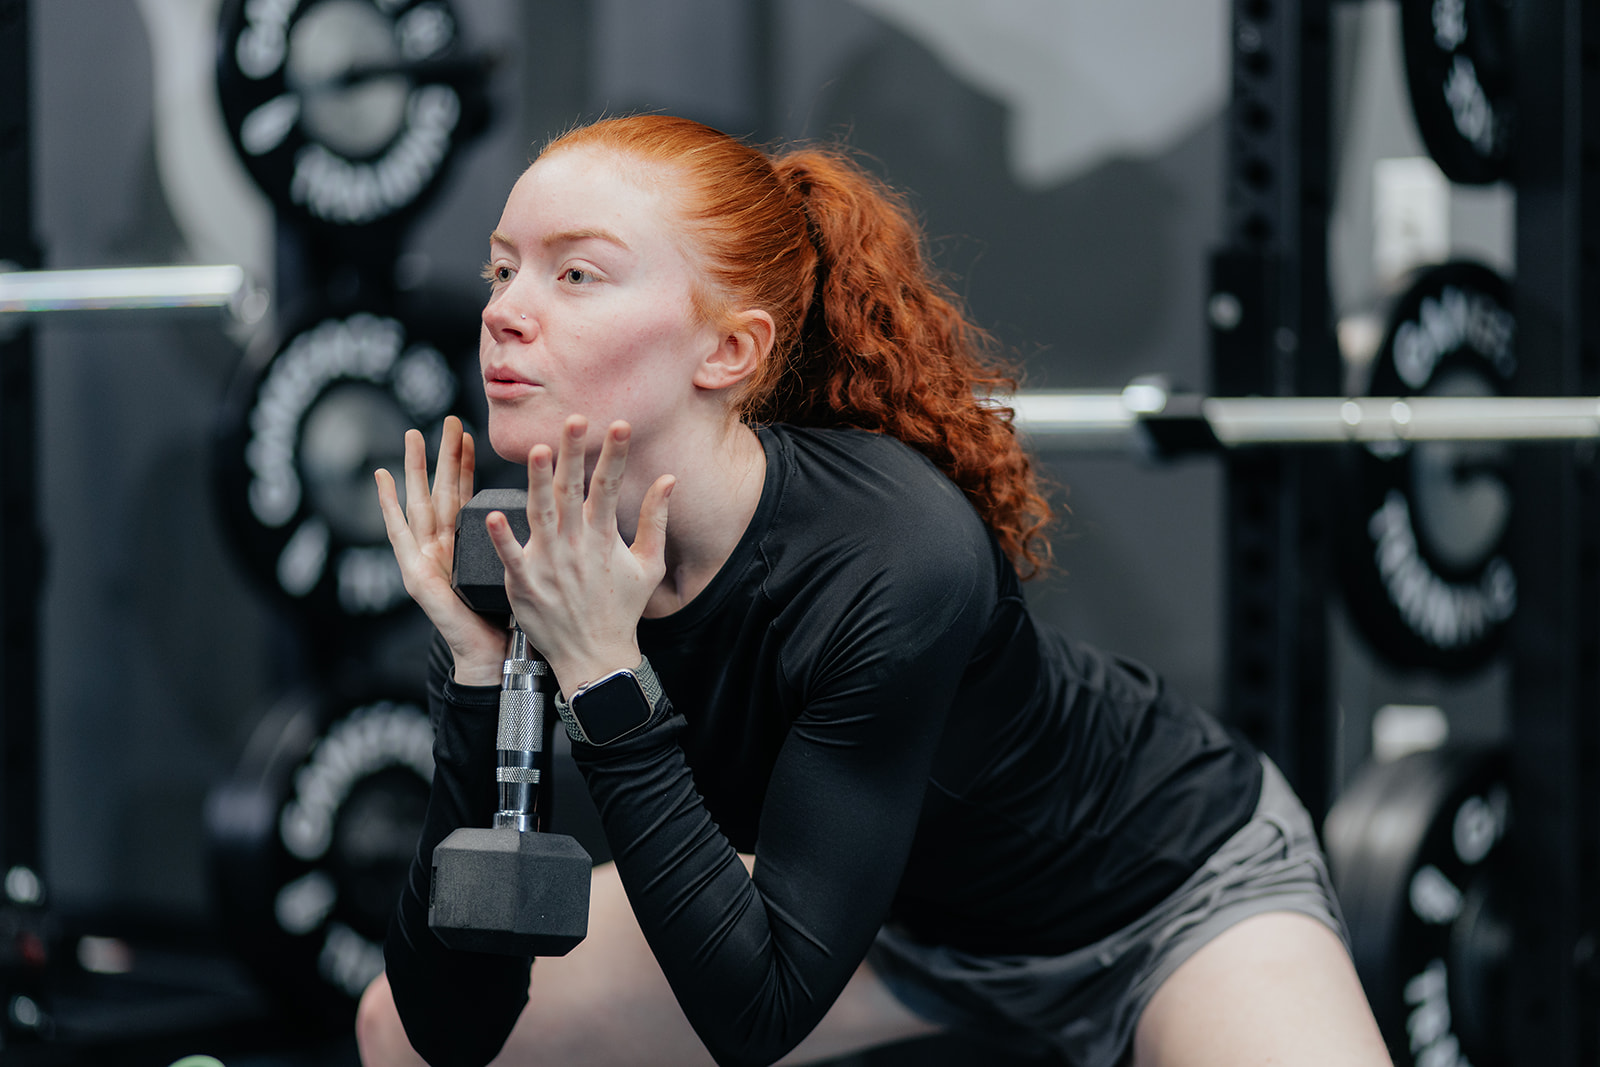 A female athlete in a lunge position doing a drill with a dumbbell.